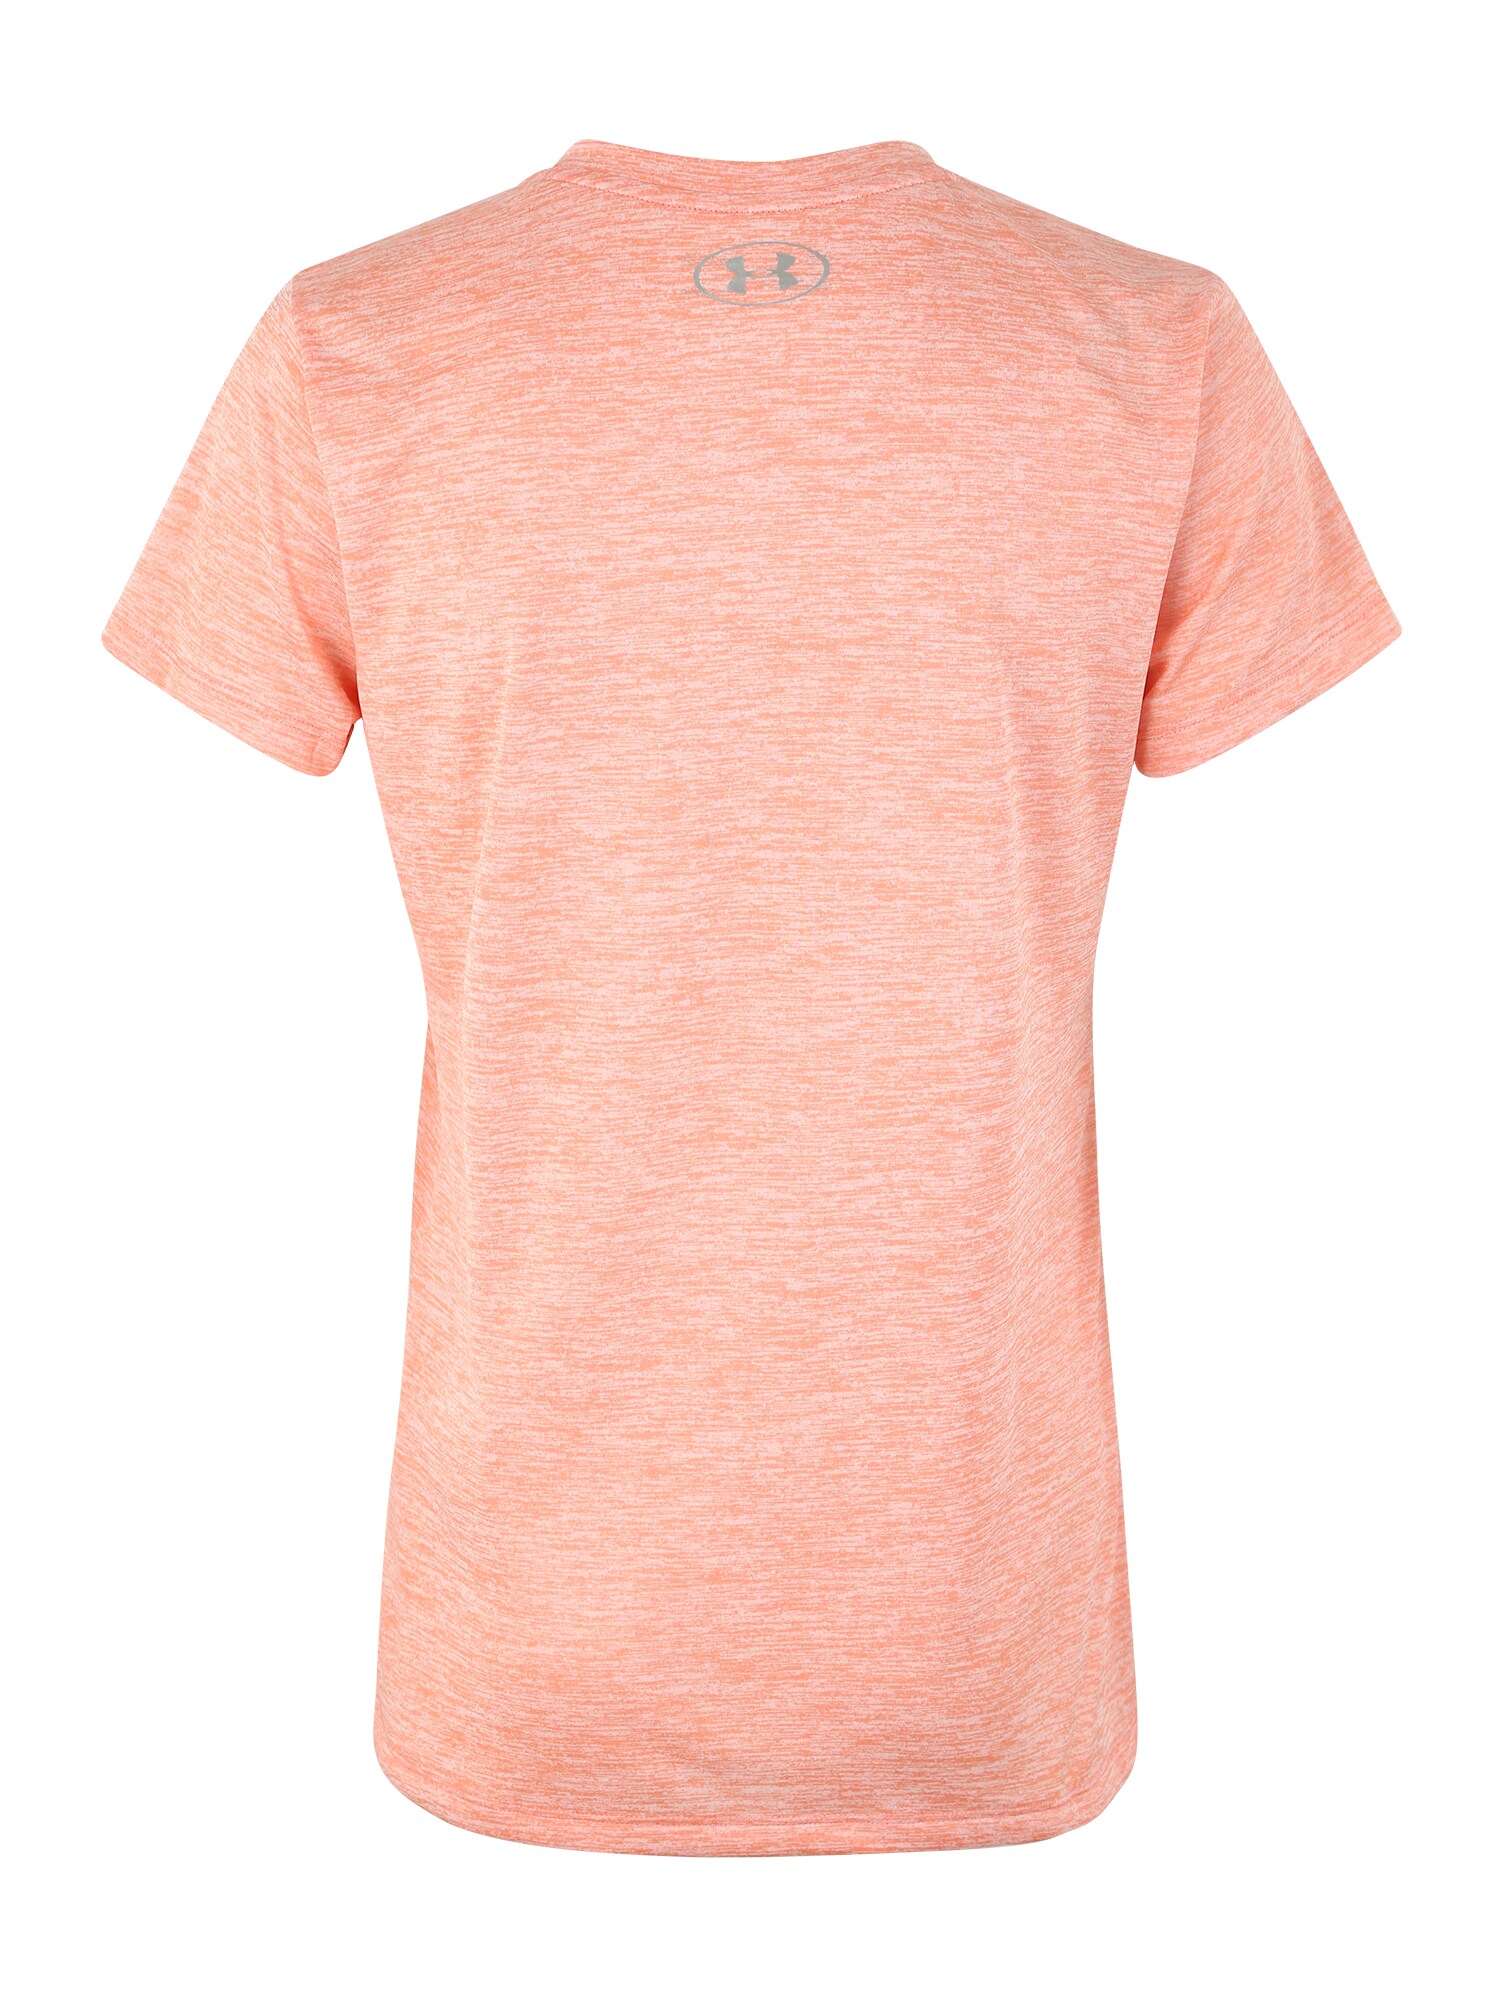 UNDER ARMOUR Functional shirt 'Tech'  coral